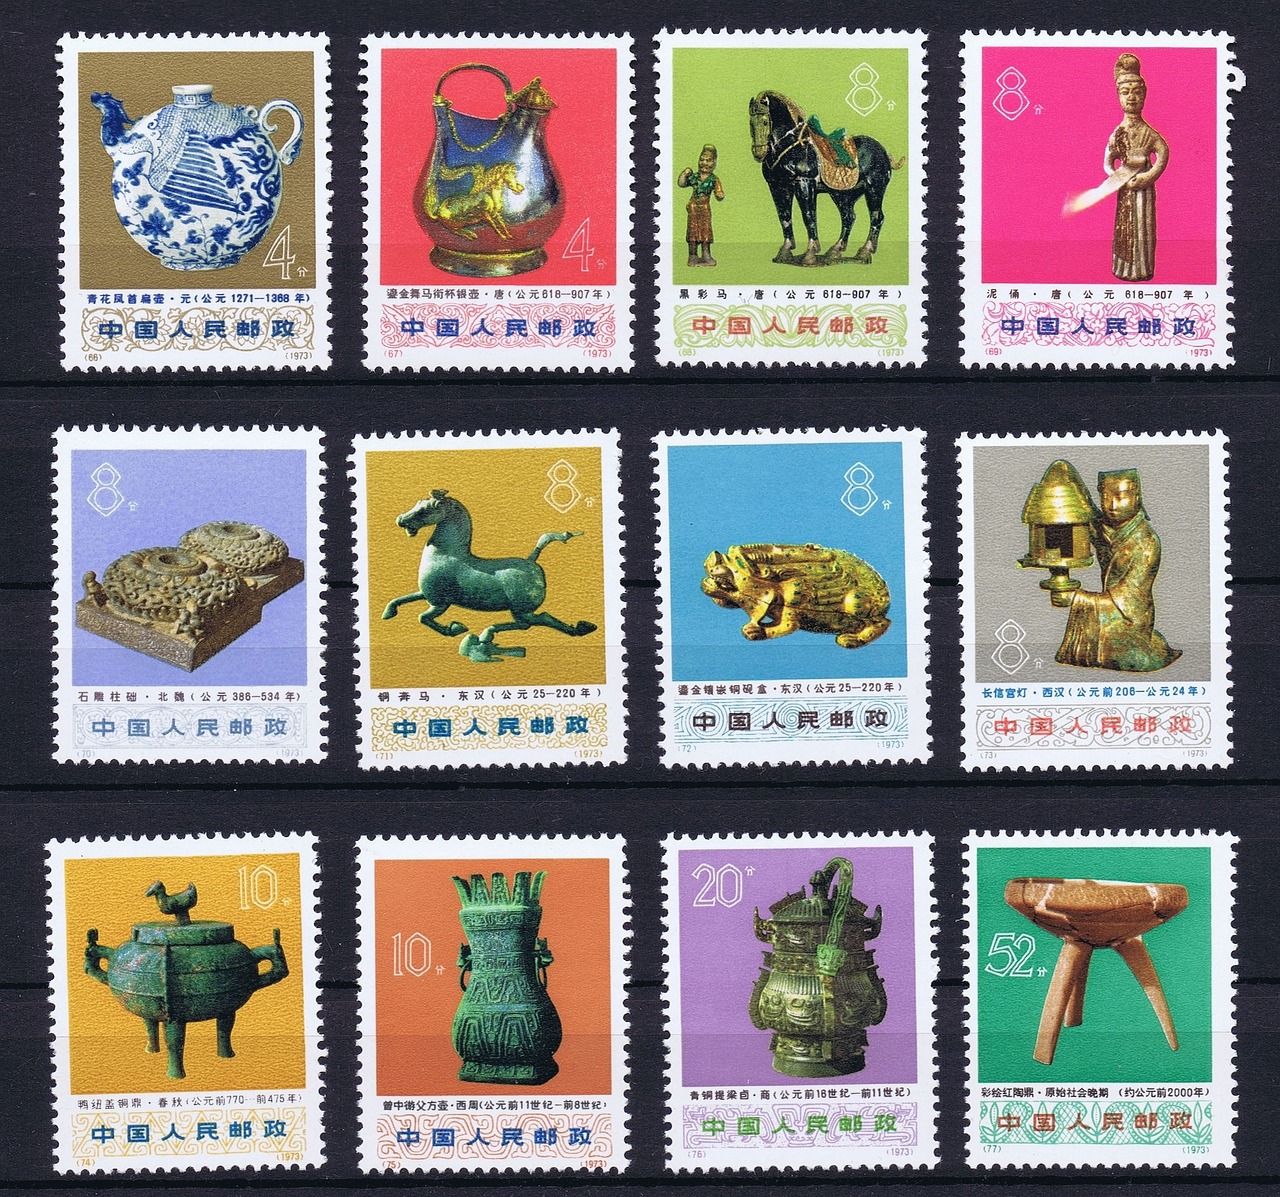 postage stamps,china,post,free pictures, free photos, free images, royalty free, free illustrations, public domain